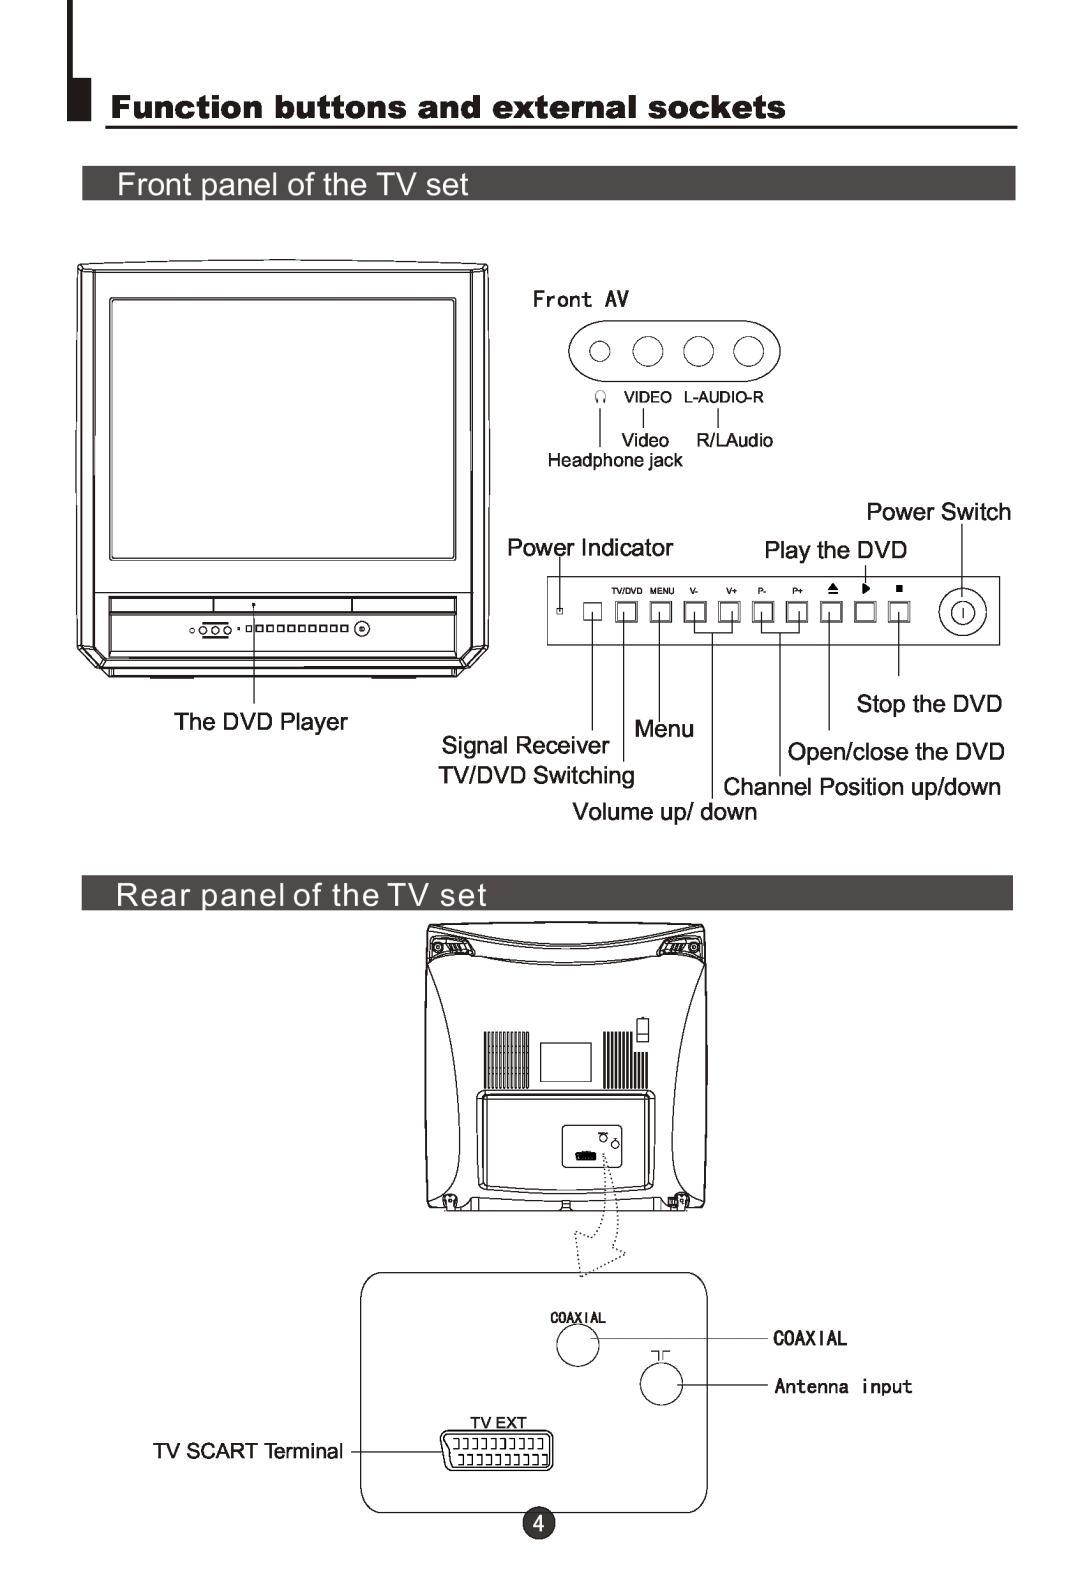 Haier DTA-2198PF Function buttons and external sockets, Front panel of the TV set, Rear panel of the TV set, Tv/Dvd Menu 